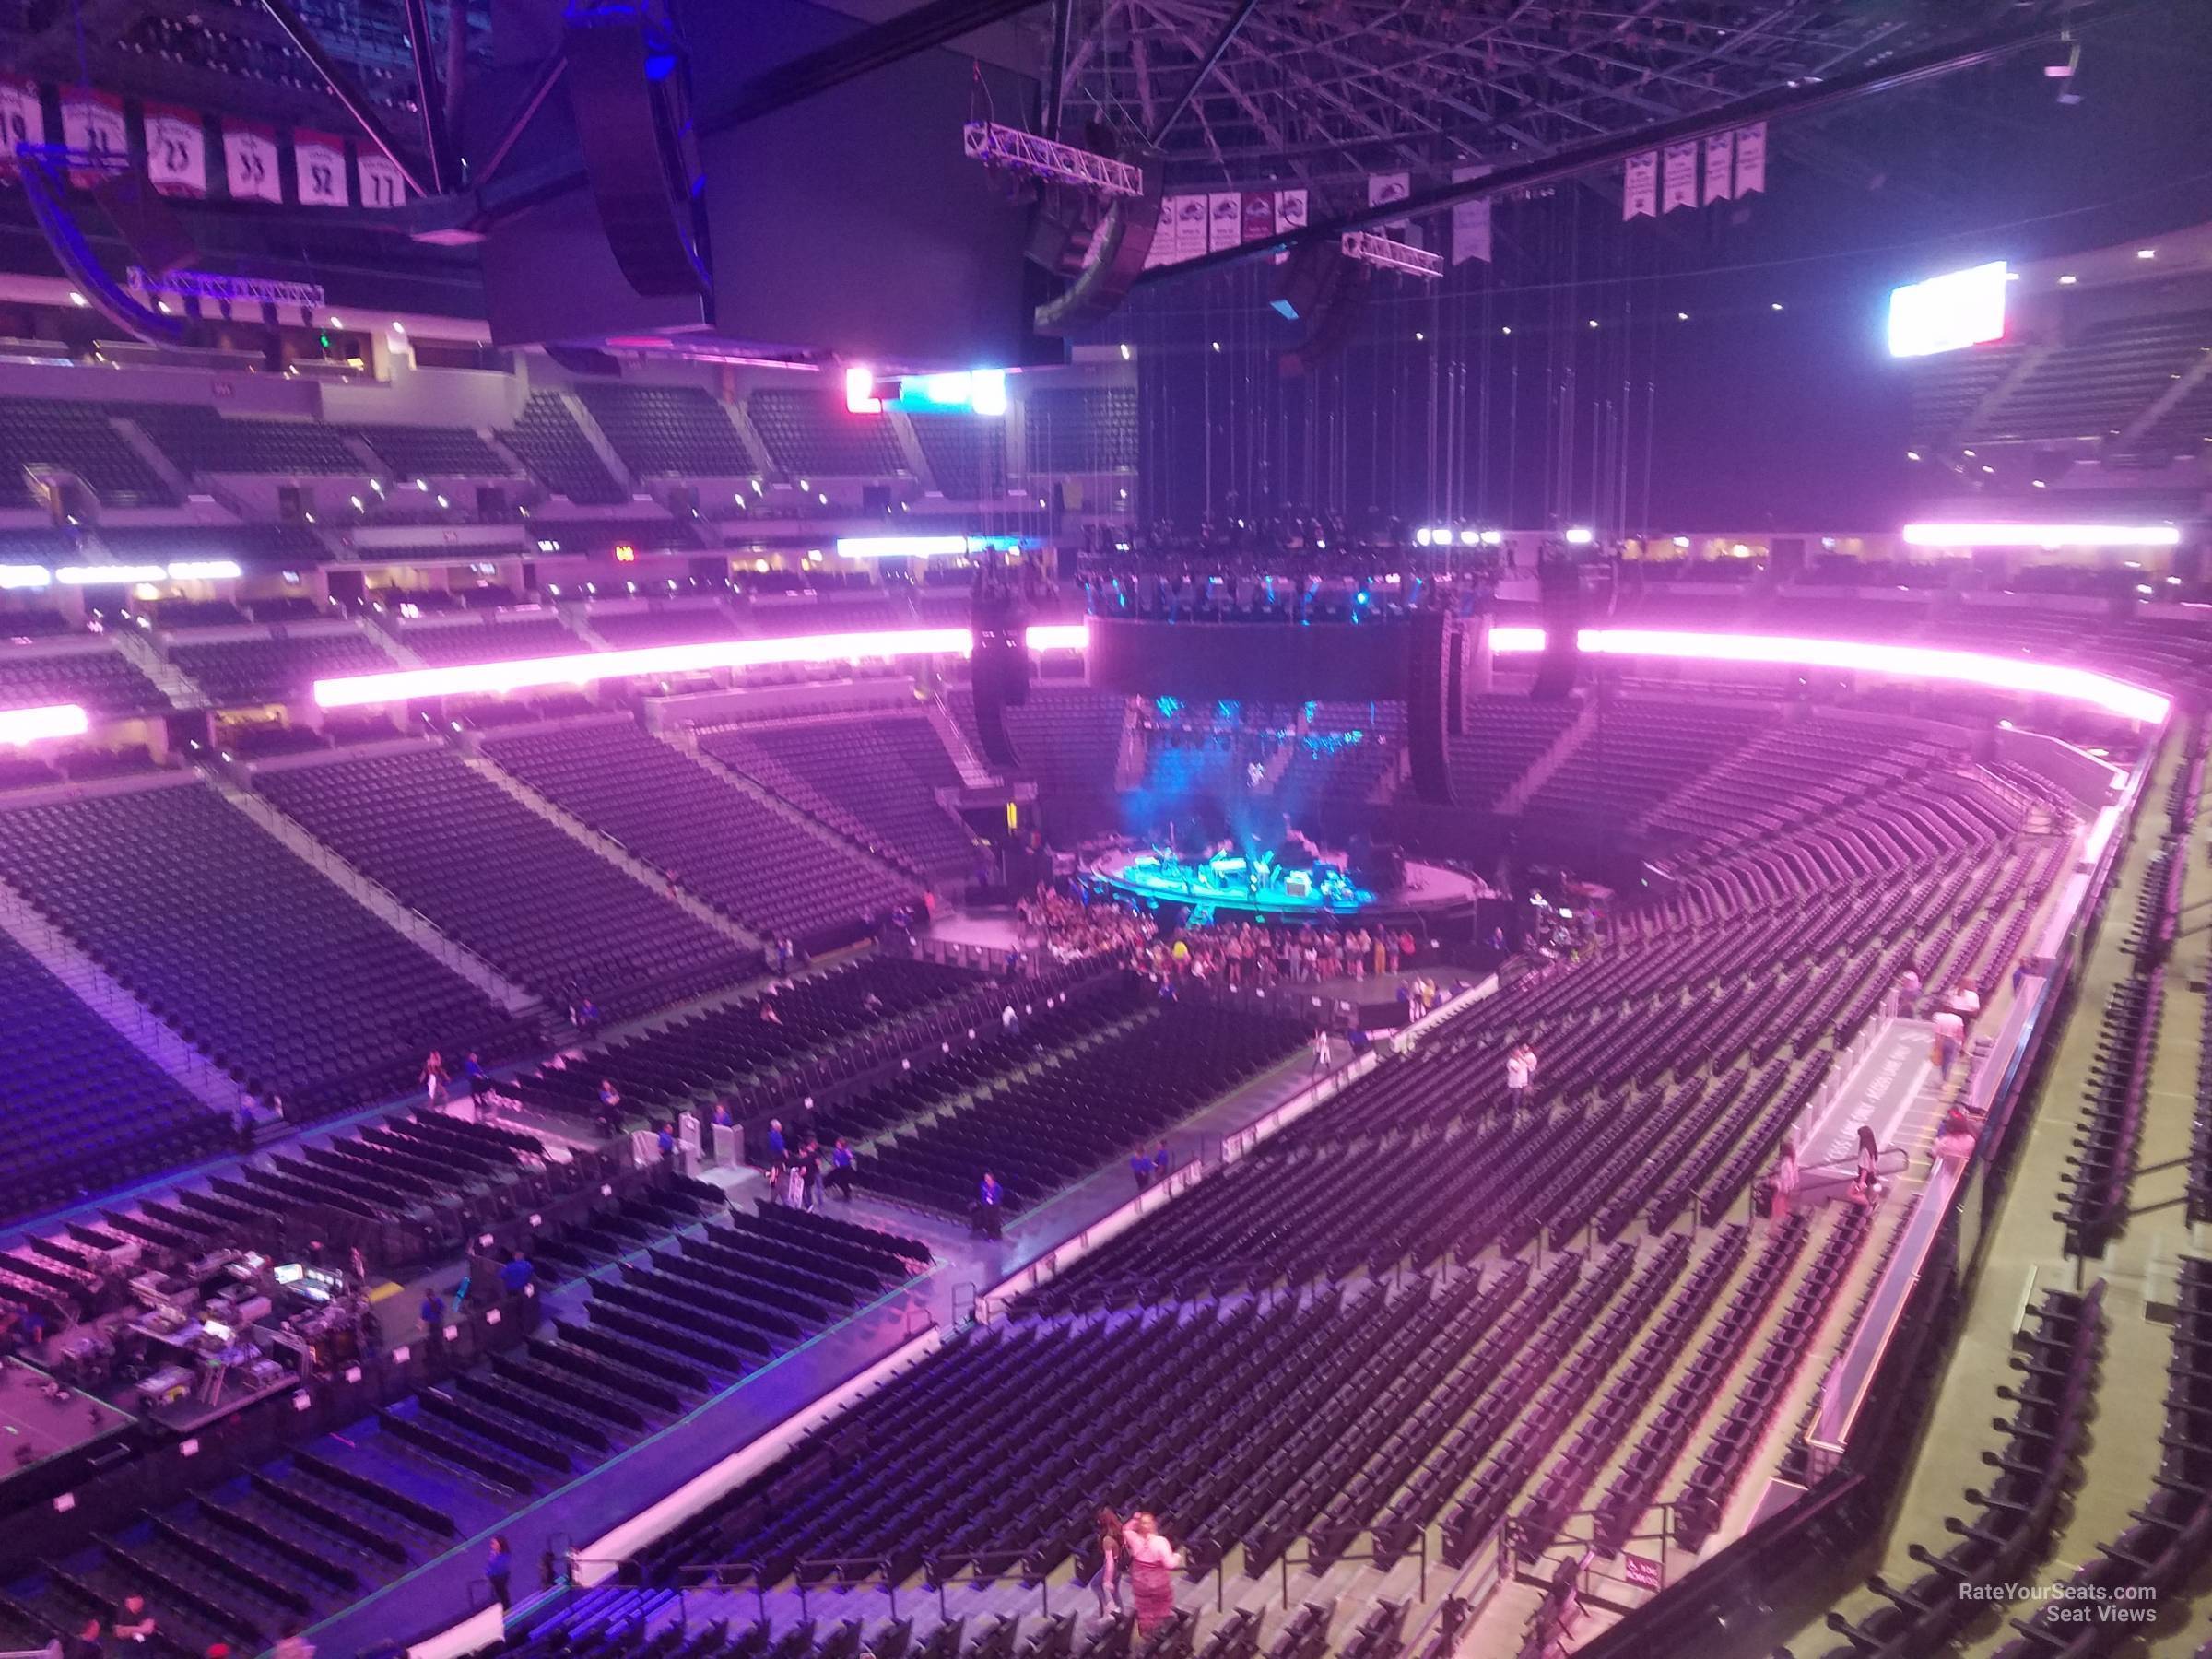 Section 311 at Ball Arena for Concerts